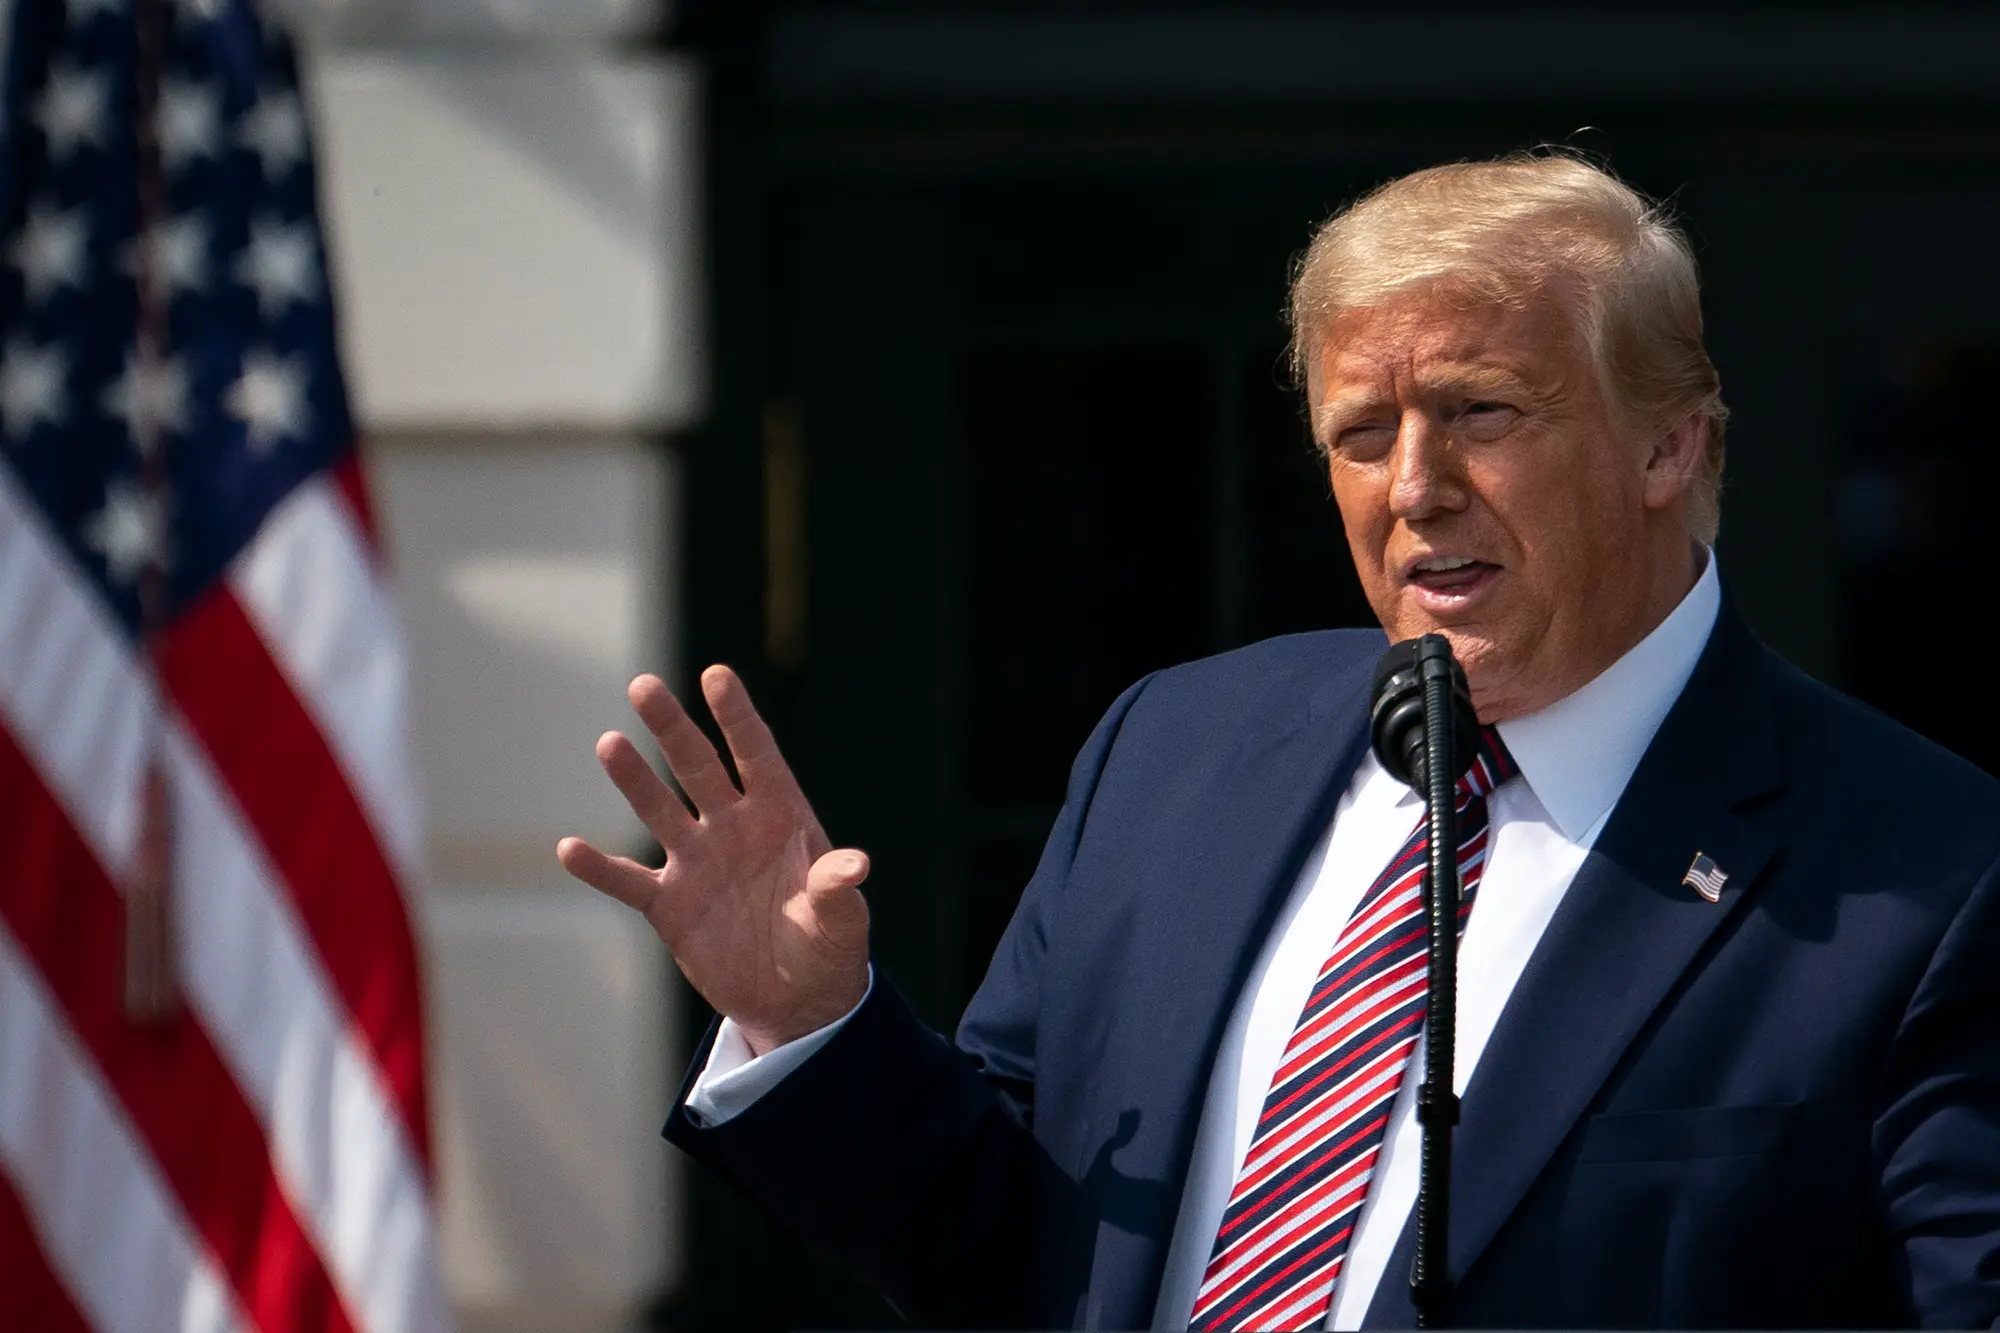 Legal battle intensifies as Trump seeks reelection (Credits: Getty Images)